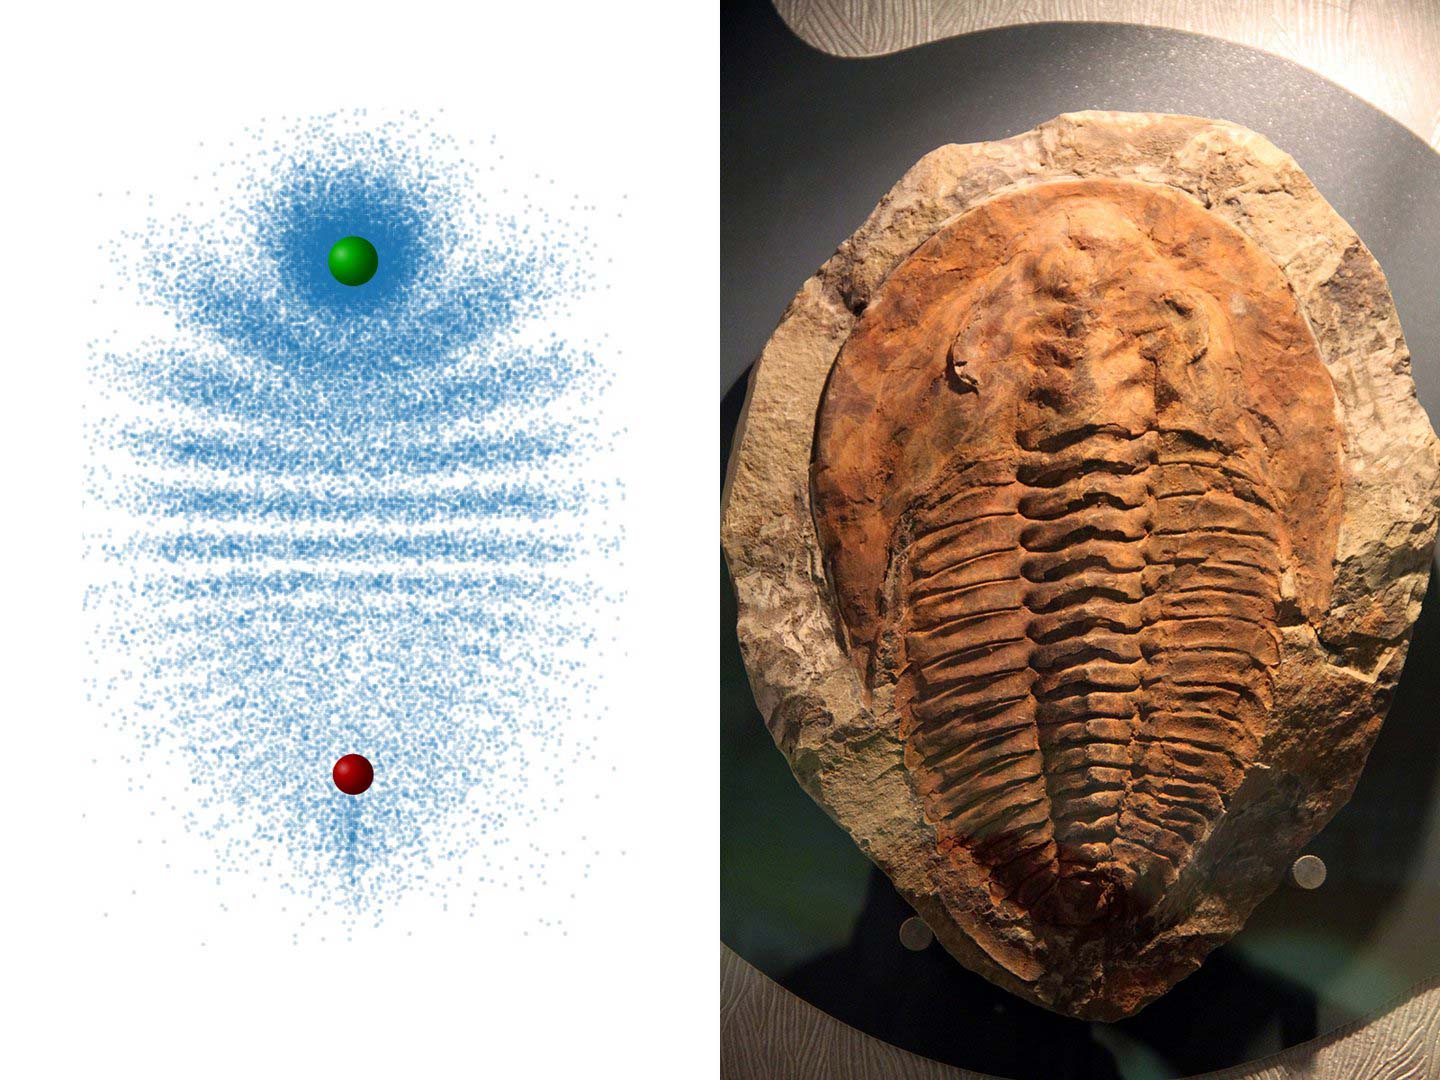 The shape of the molecule is reminiscent of a fossil trilobite